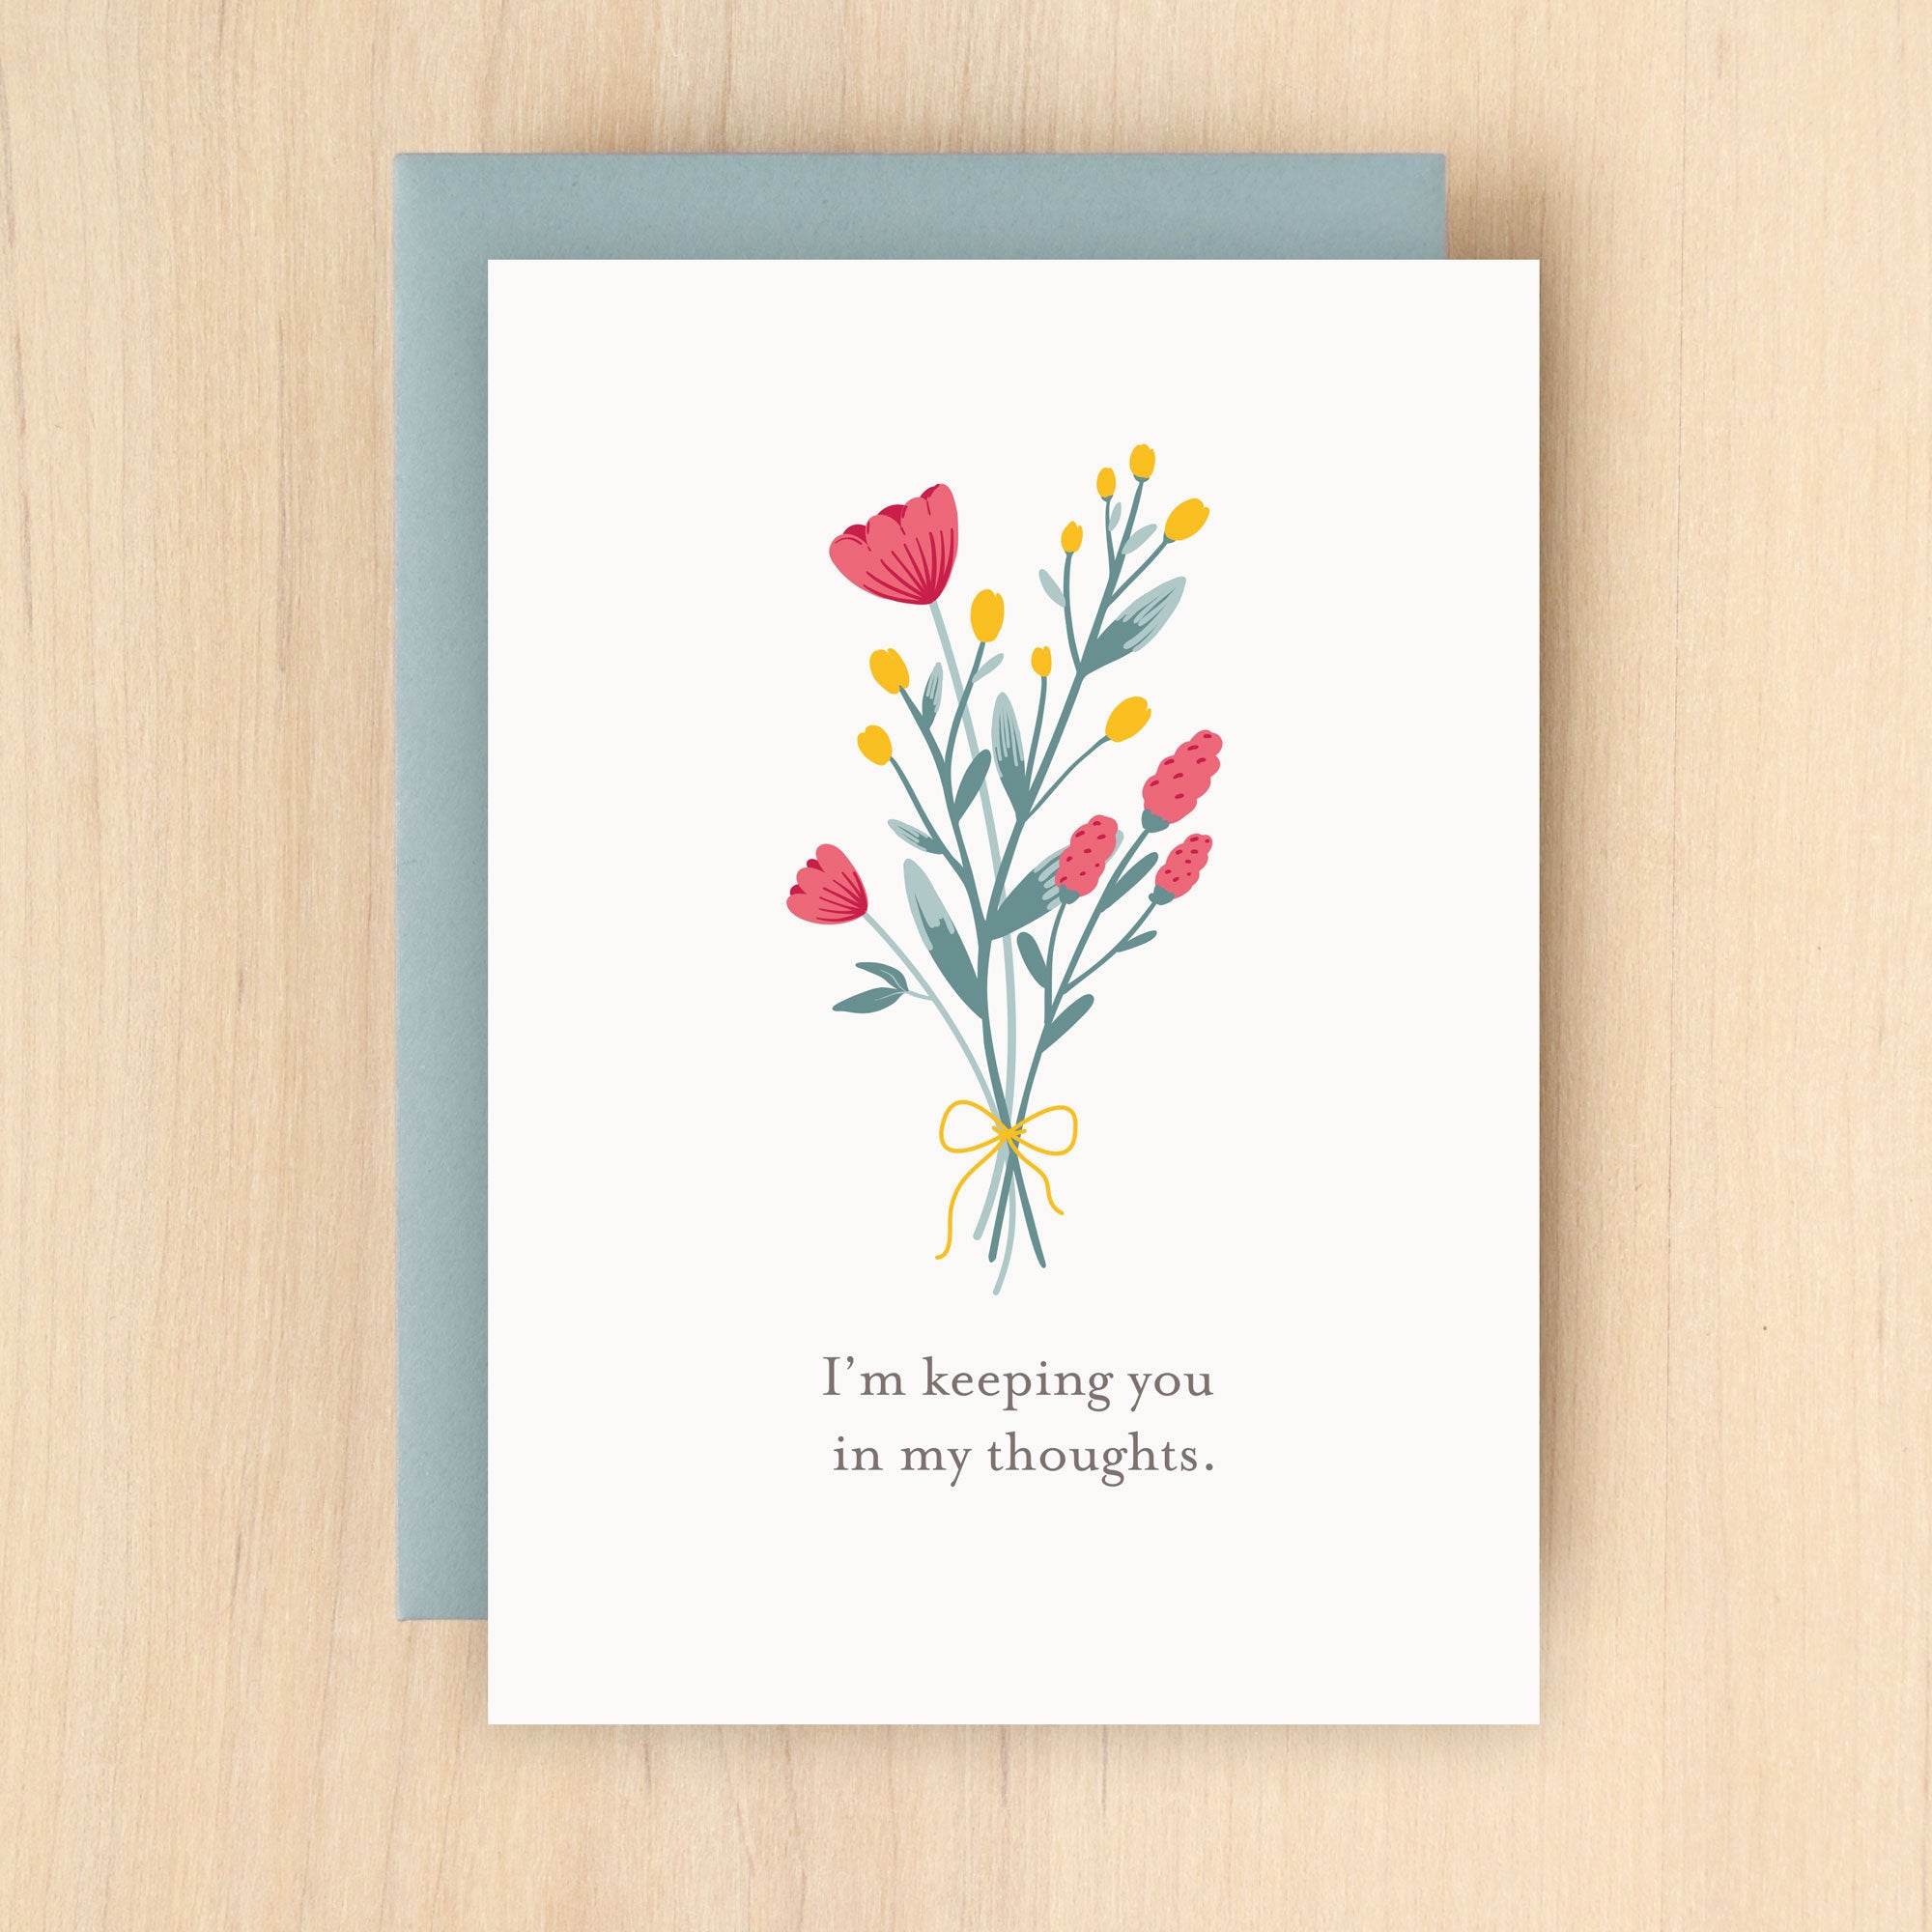 "I'm keeping you in my thoughts" Keeping Thoughts Greeting Card #280